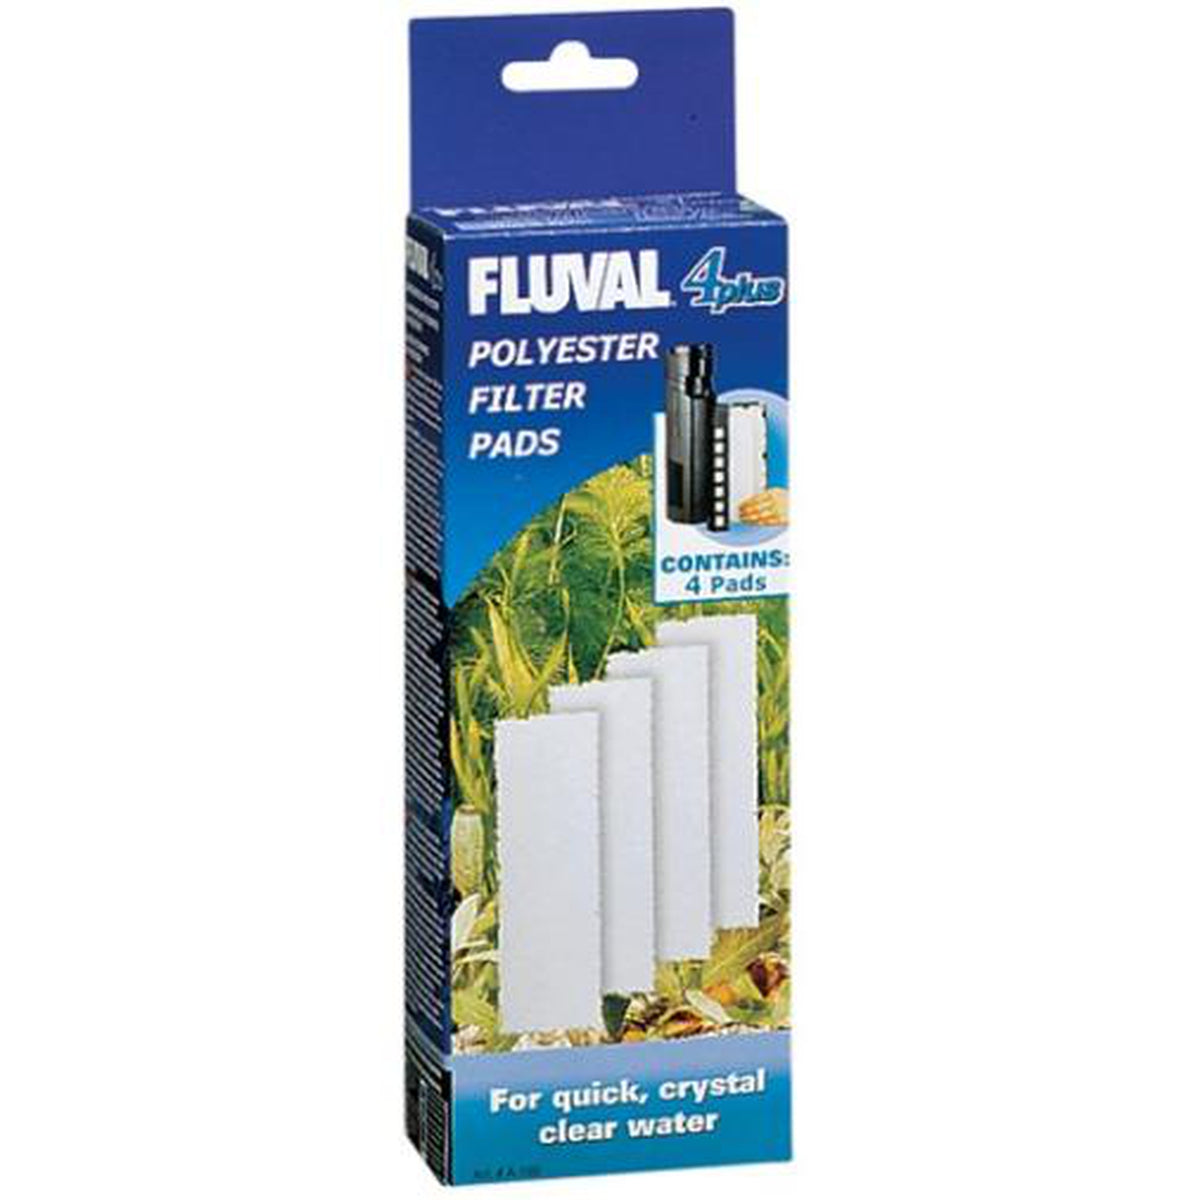 Fluval 4 Plus Polyester Pads